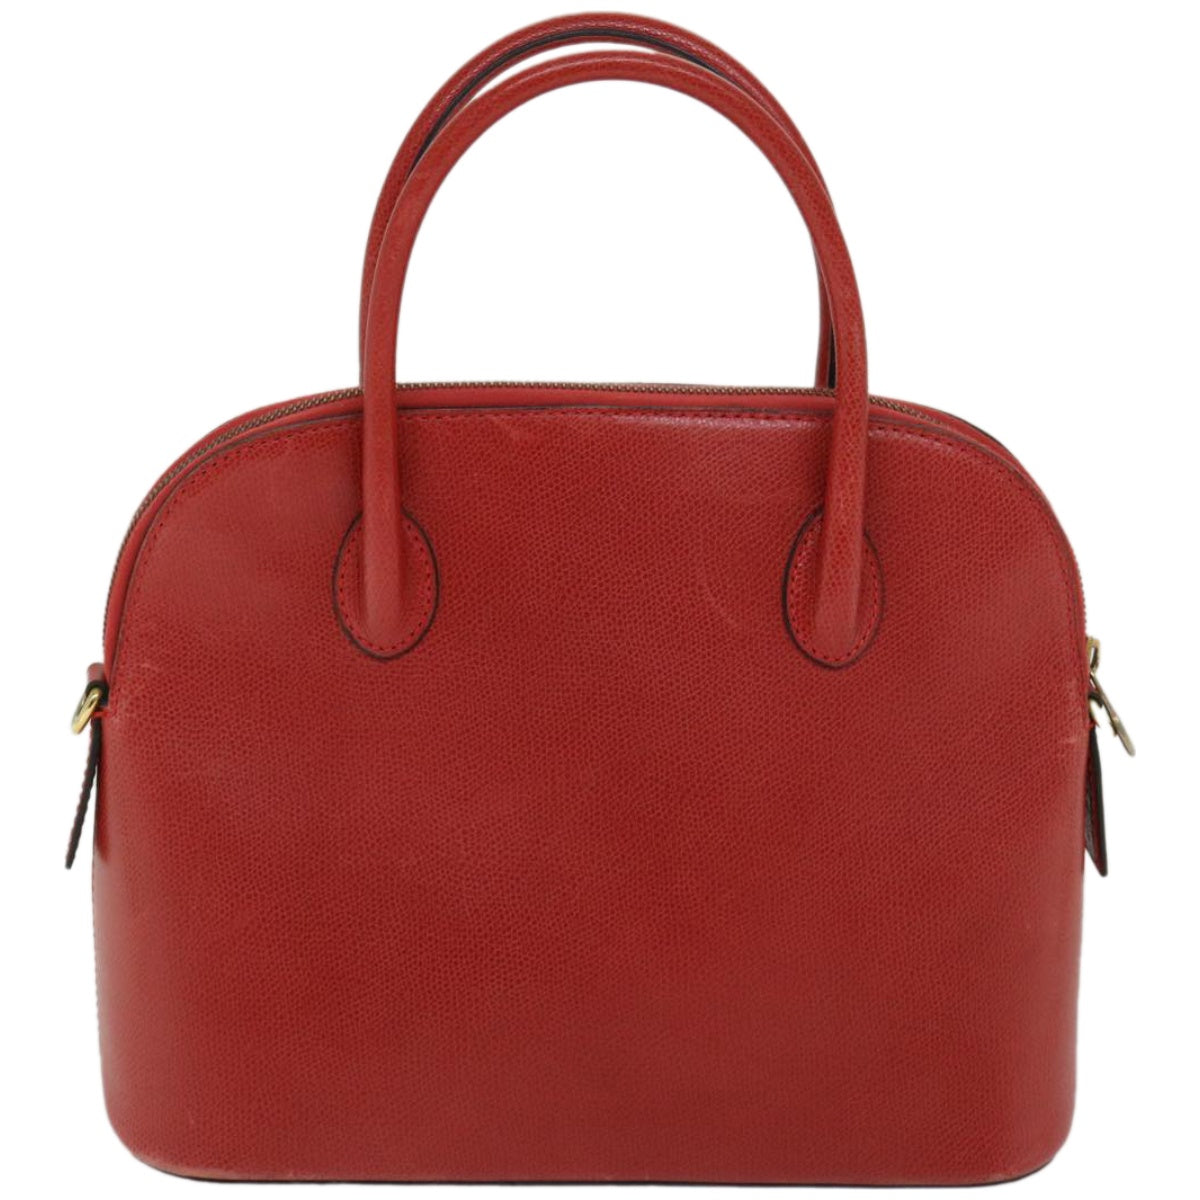 CELINE Hand Bag Leather 2way Red Auth 67191 - 0